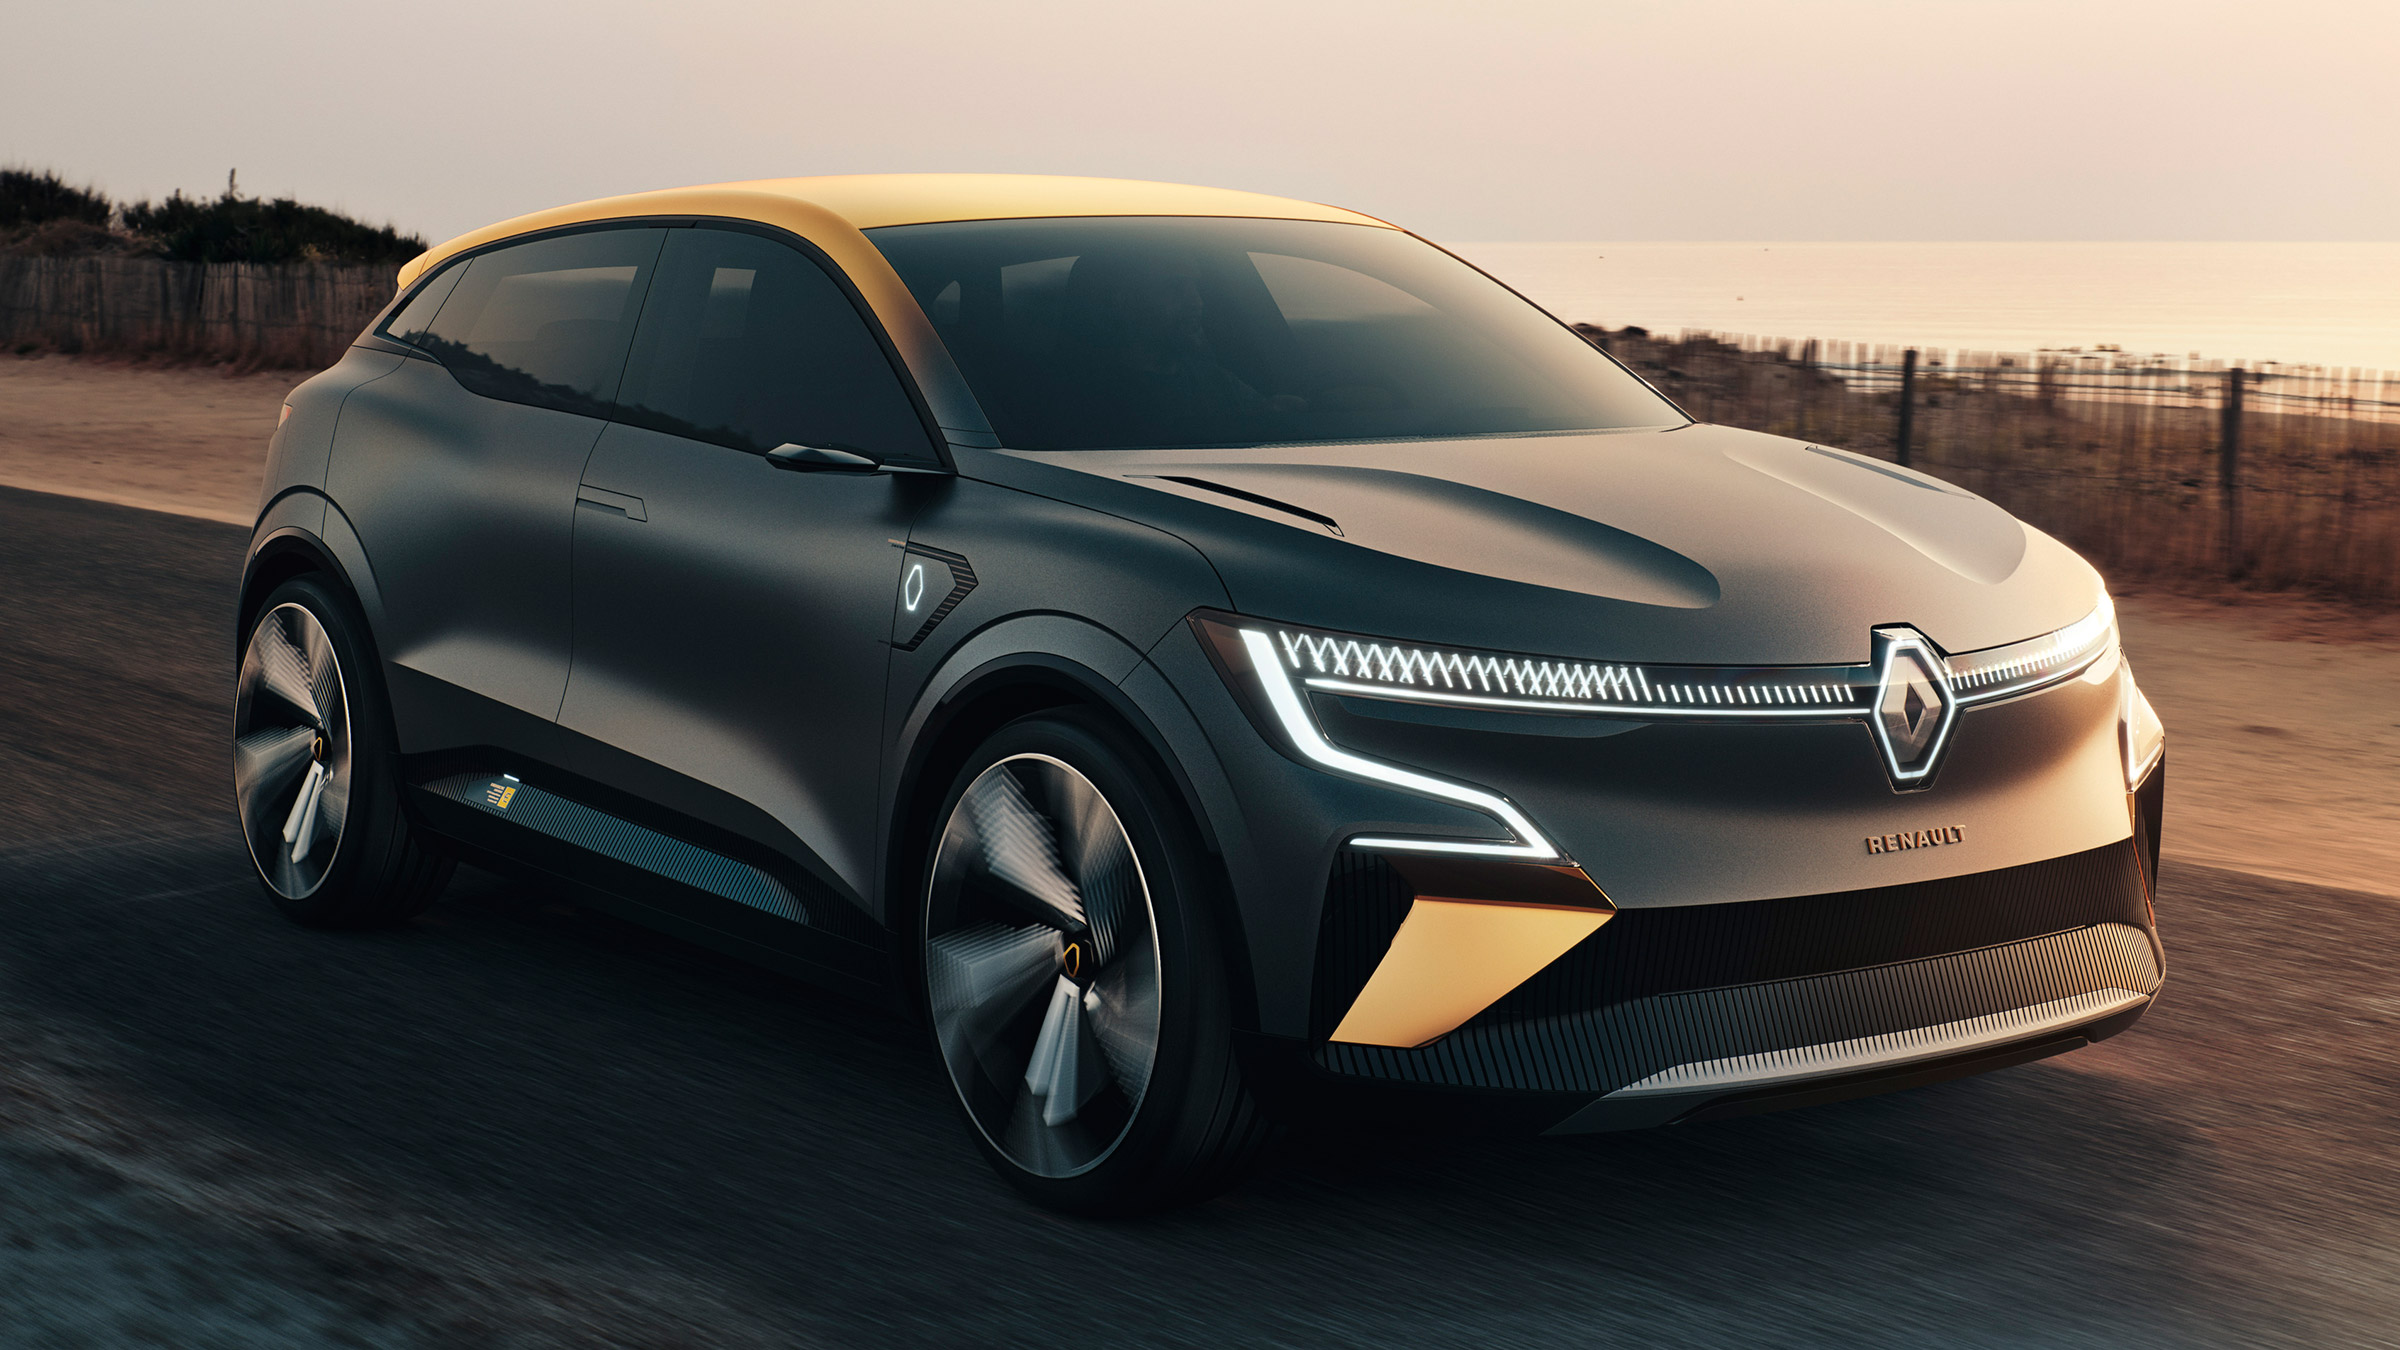 New Renault Megane eVision concept previews electric Megane SUV for